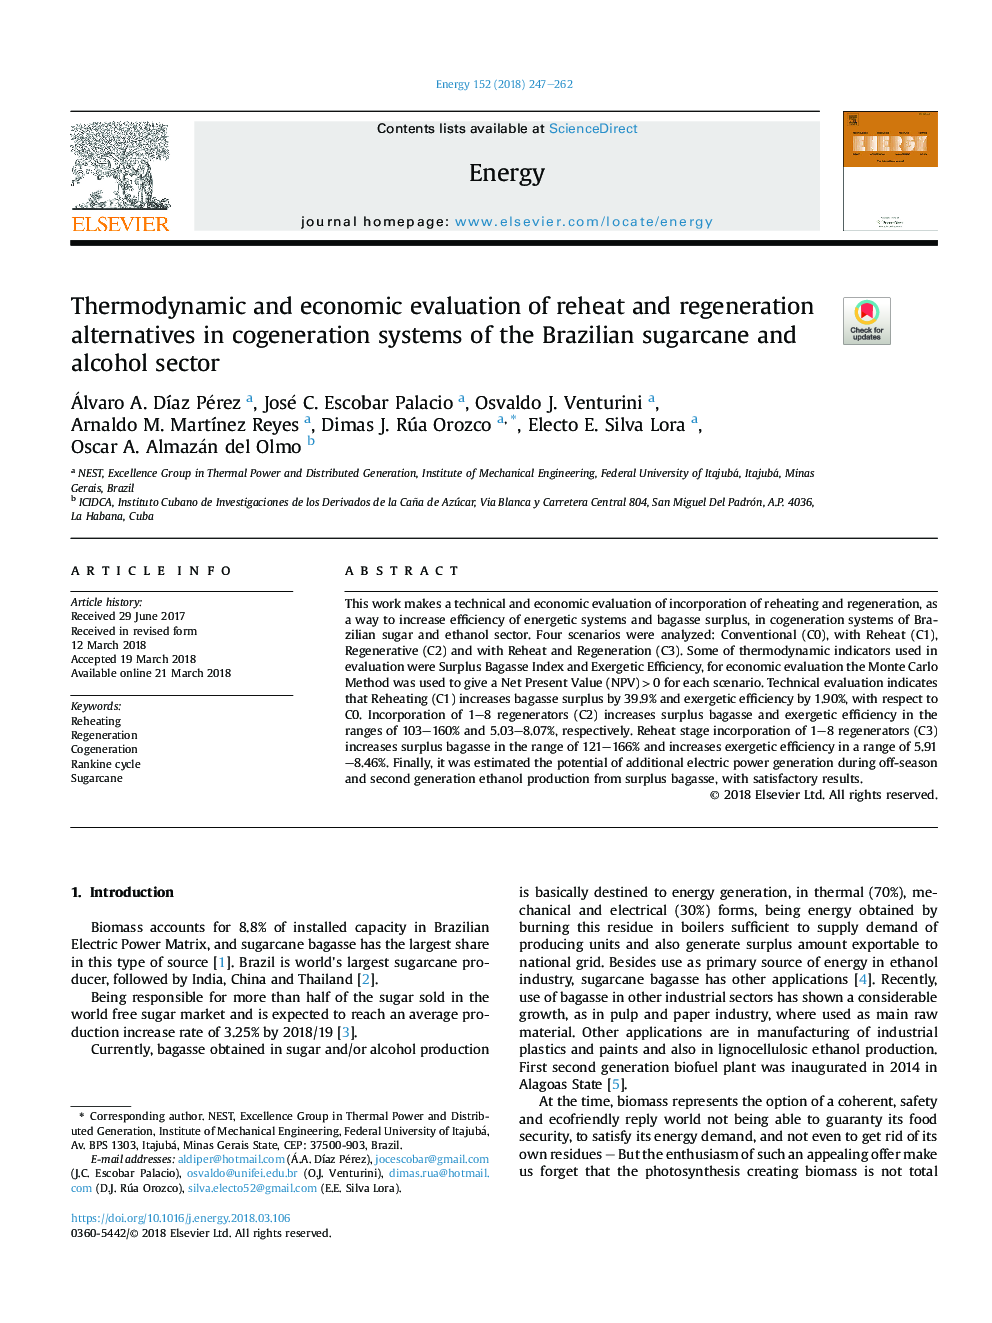 Thermodynamic and economic evaluation of reheat and regeneration alternatives in cogeneration systems of the Brazilian sugarcane and alcohol sector